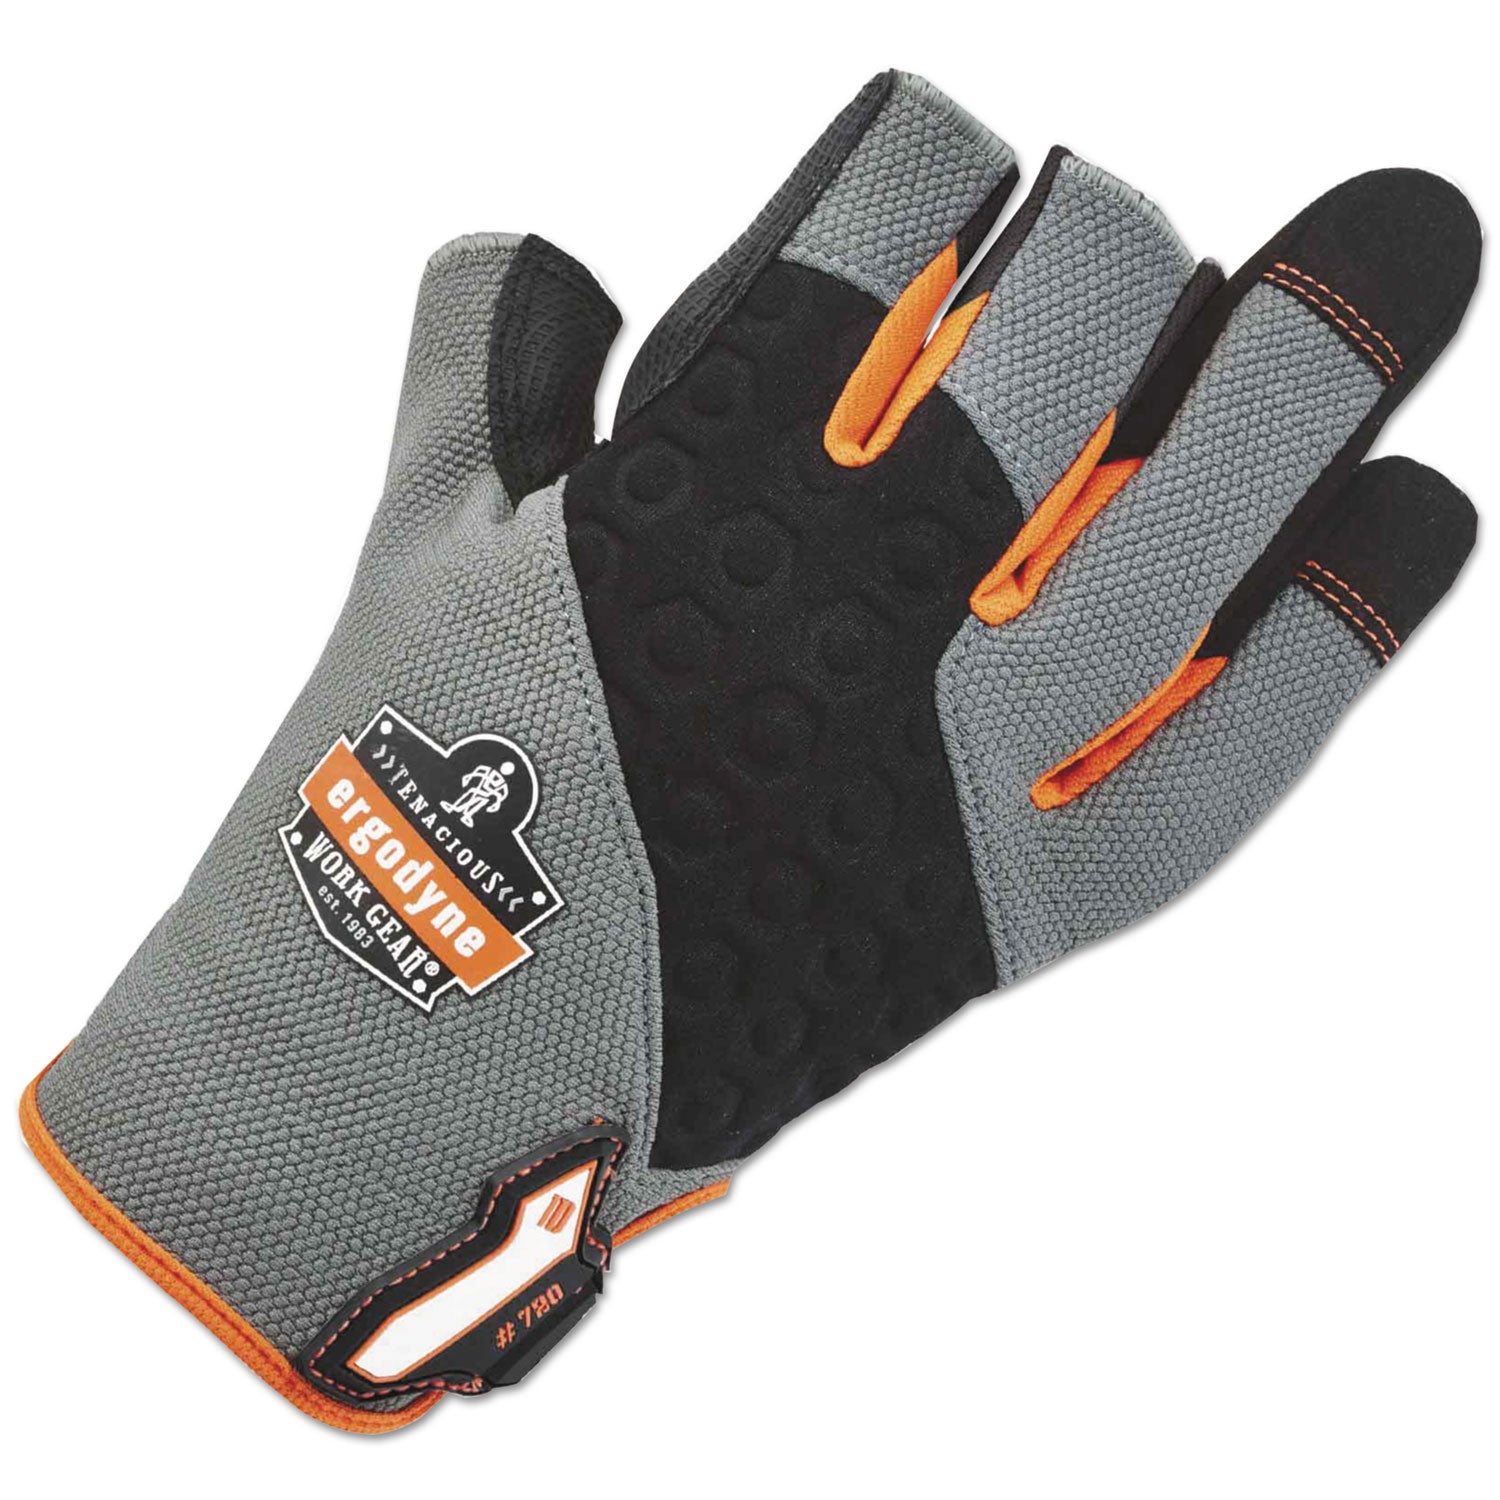 proflex-720-heavy-duty-framing-gloves-gray-large-1-pair-ships-in-1-3-business-days_ego17114 - 1